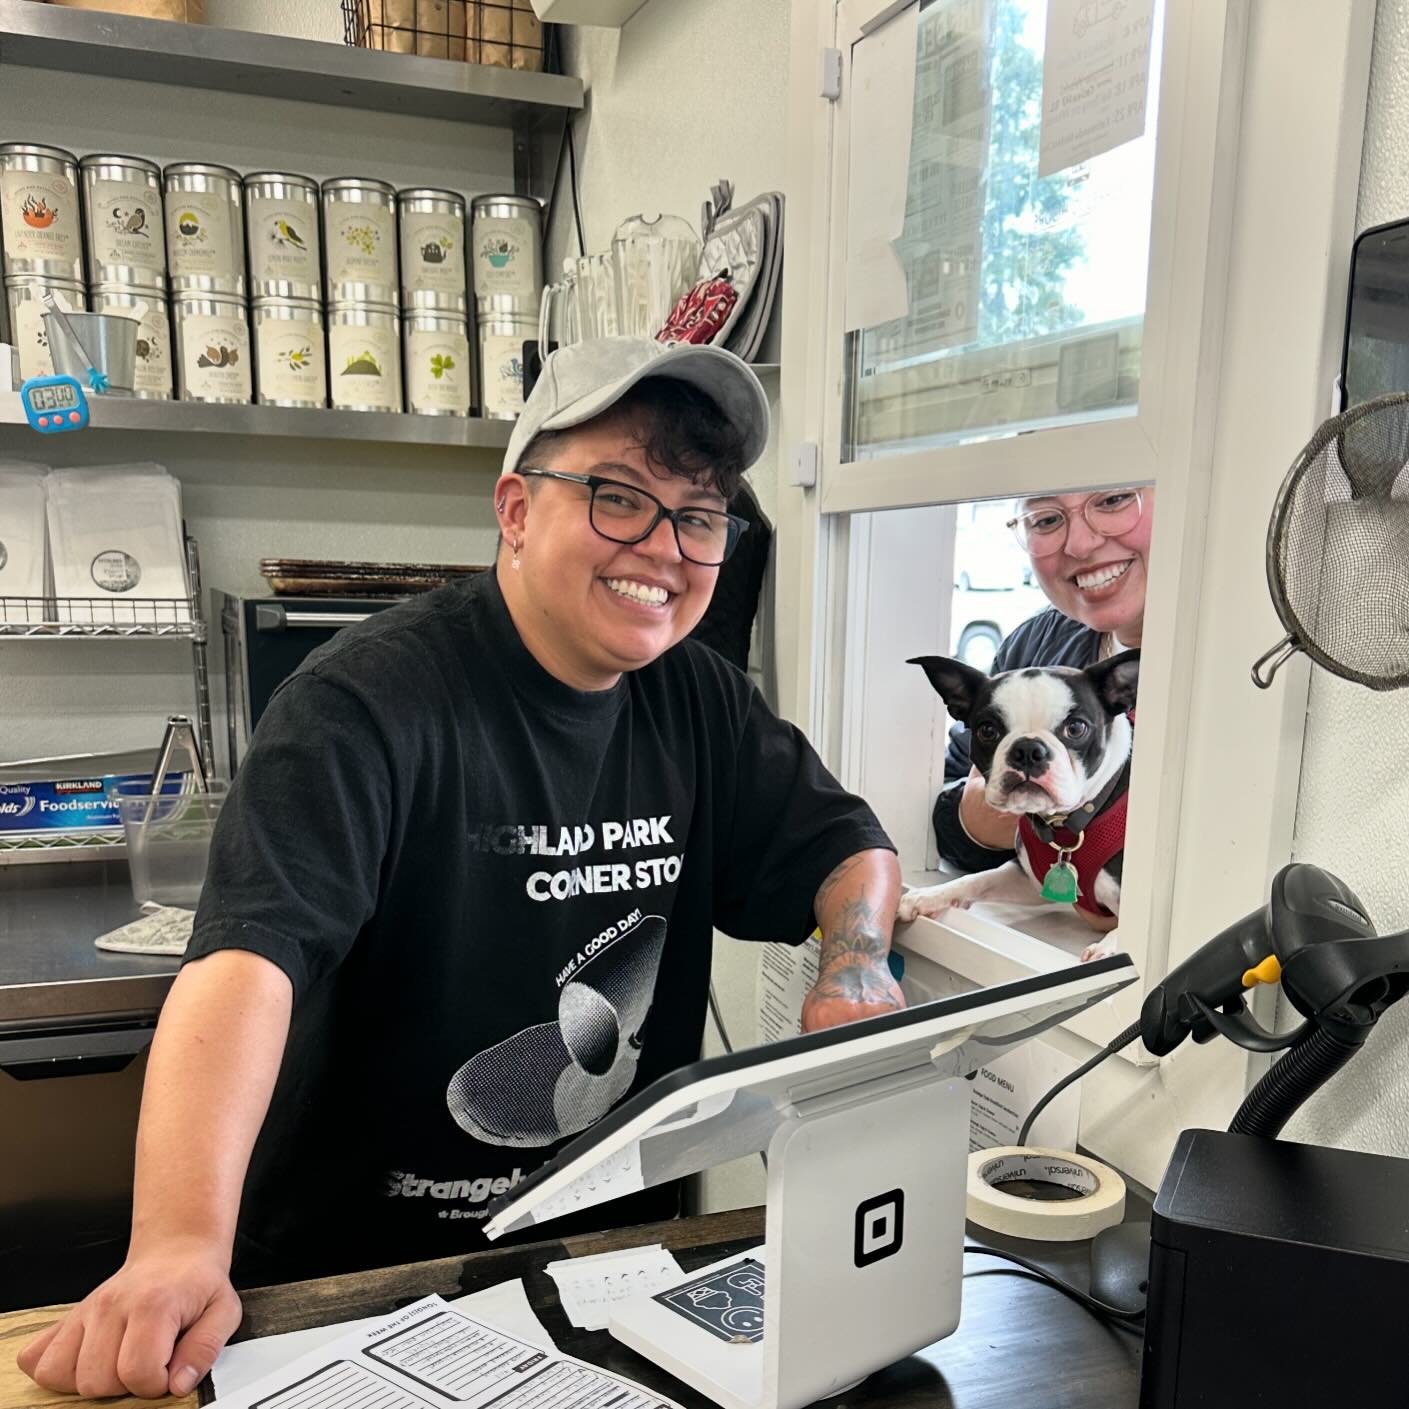 We ❤️ our furry neighbors! Come by our barista window on your walk or trip to the dog park - we have special treats from @addys_pet_shop for the pups! 

#highlandparkpups #puppylove #supportyourneighbors #teddy